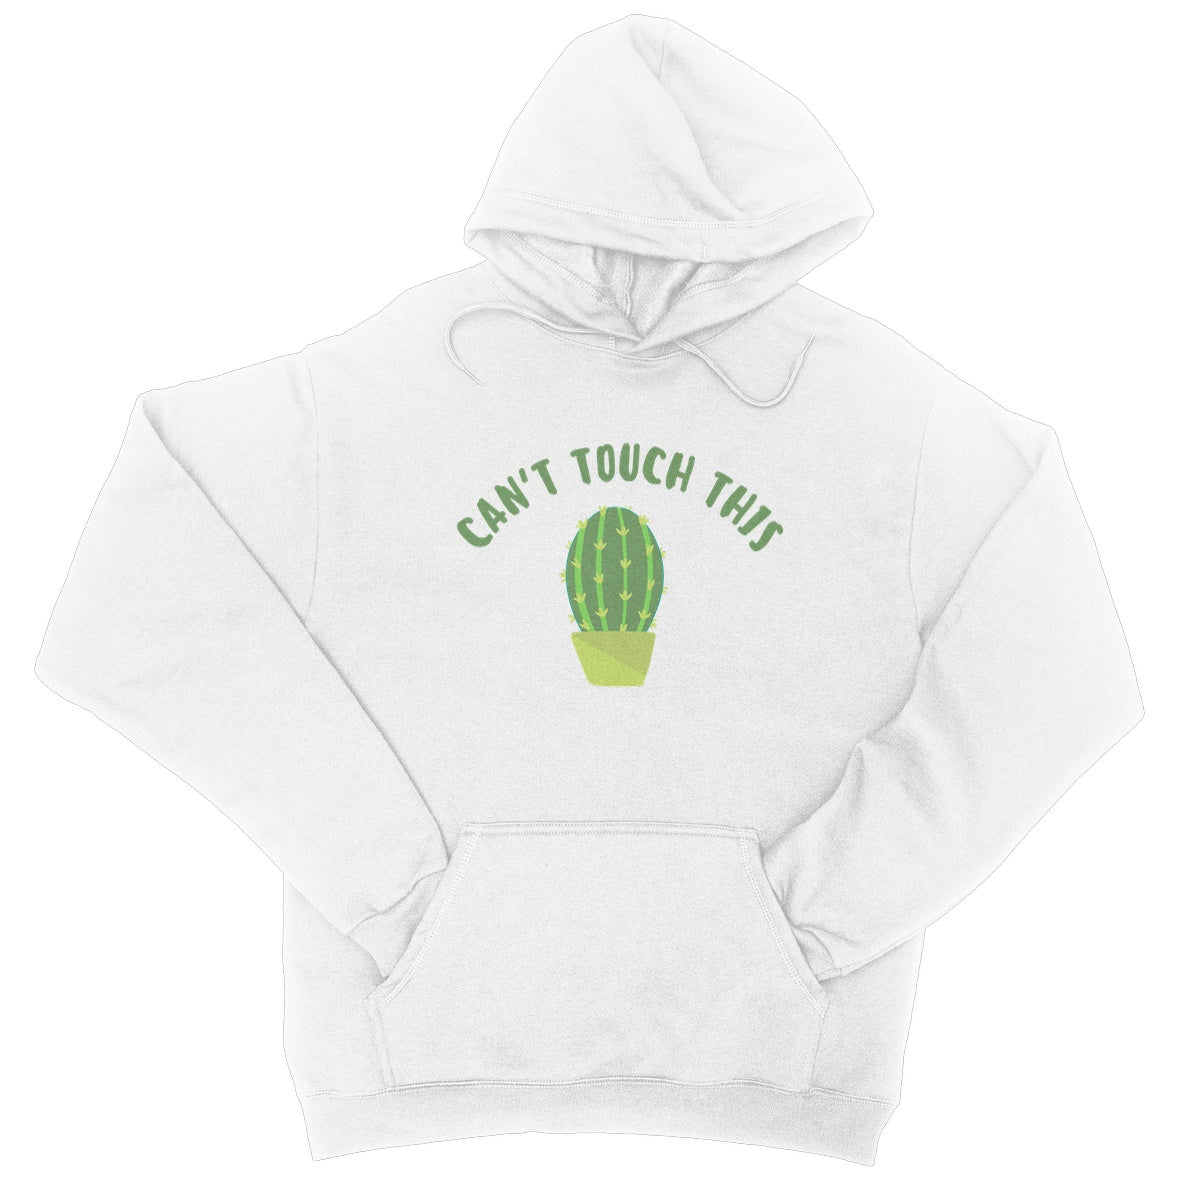 can't touch this hoodie white